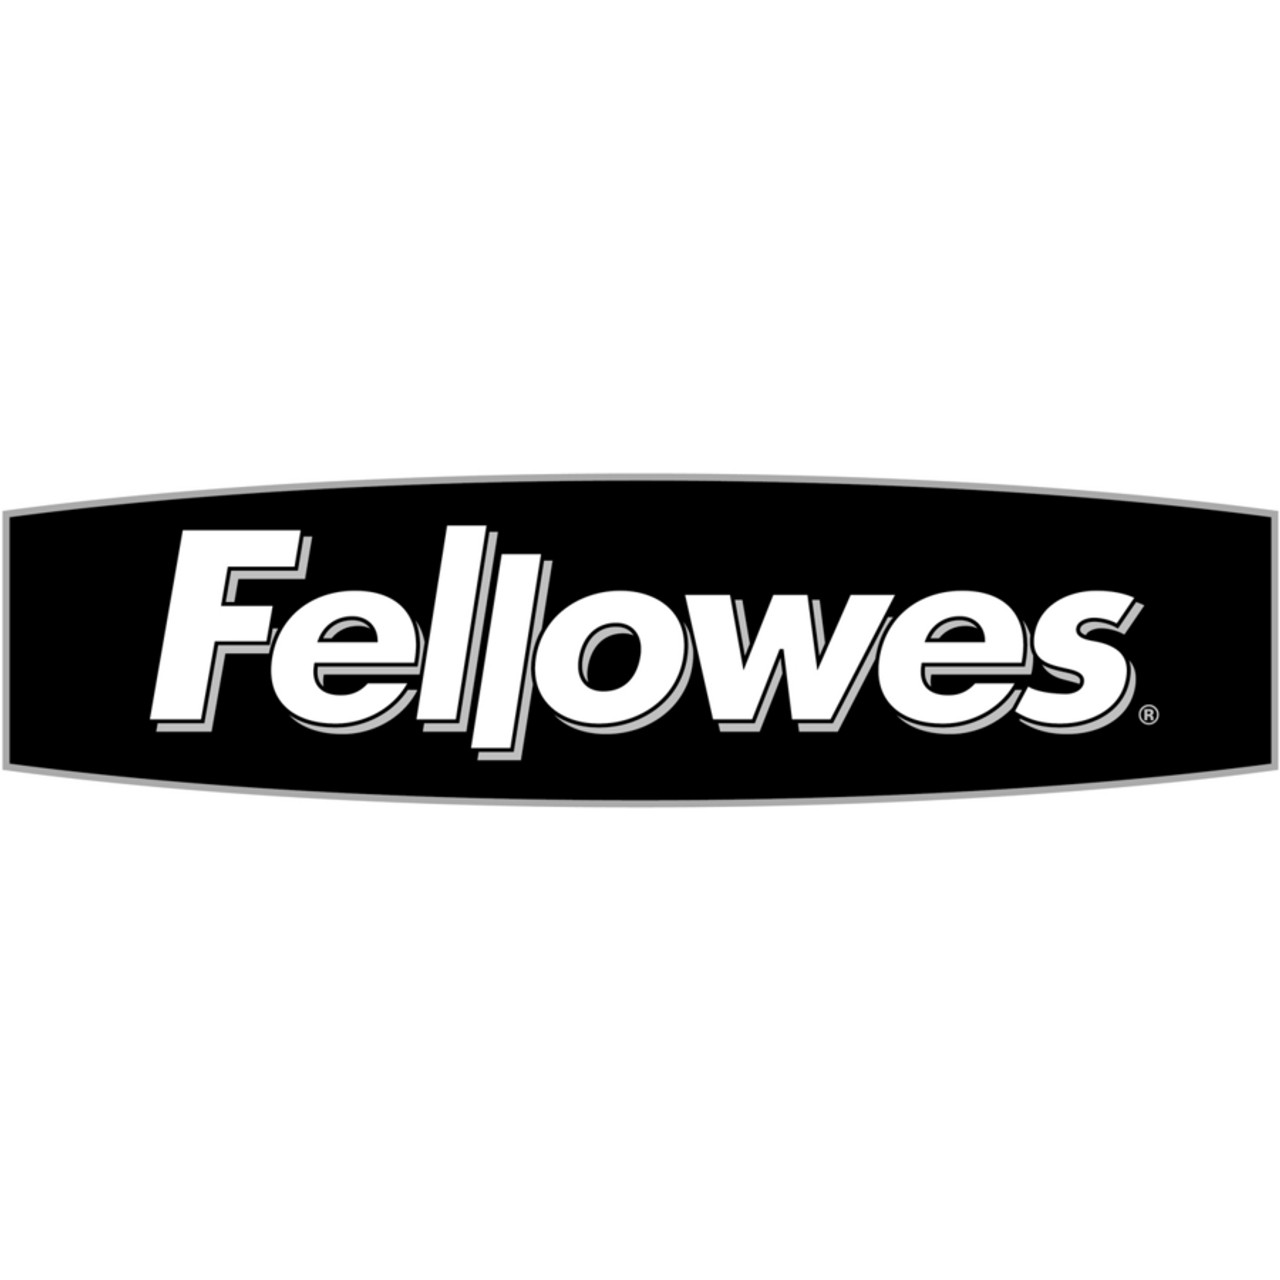 Fellowes Energizer Foot Support 